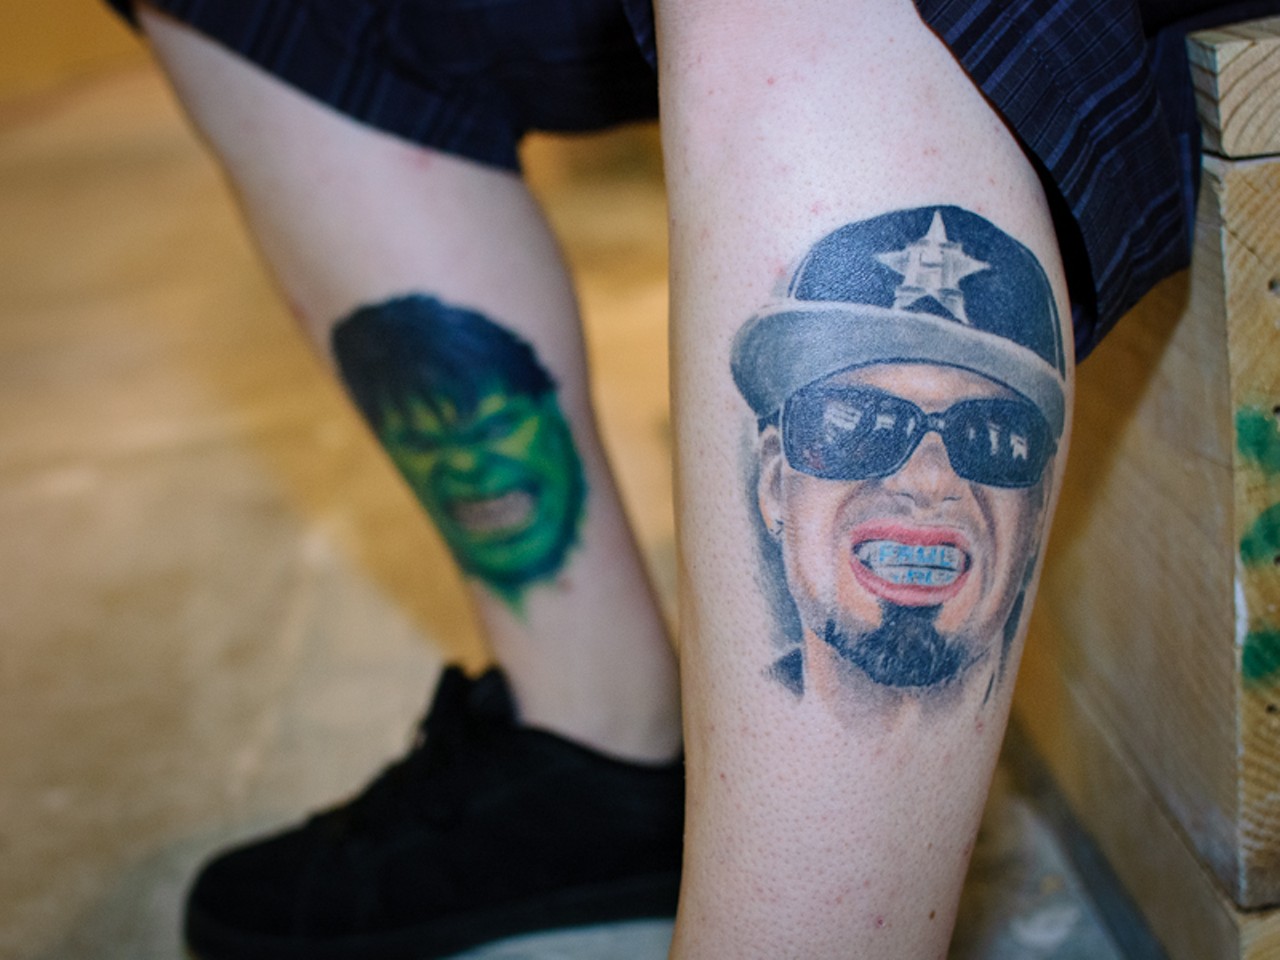 Mark Persek drove three-and-a-half hours from Danville, Illinois to show his leg tattoos -- The Hulk and Paul Wall. Check out that bling.